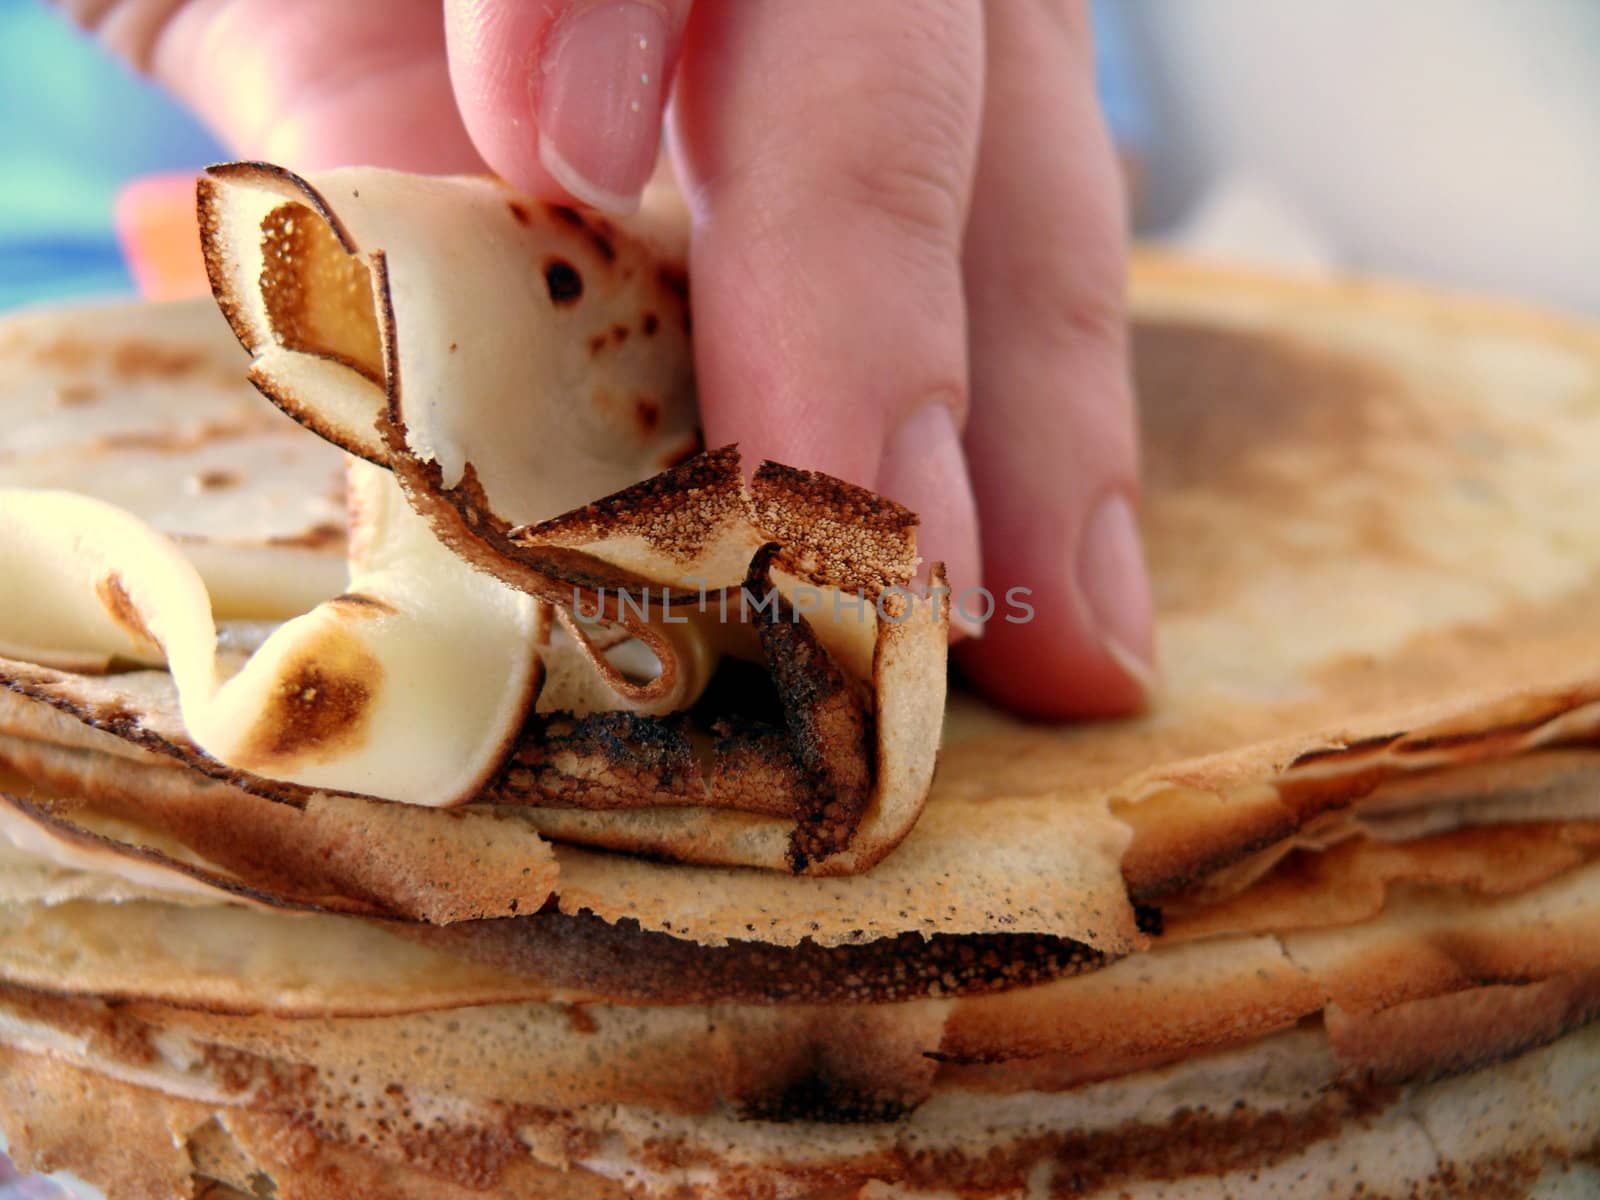 traditional russian meal - pancakes